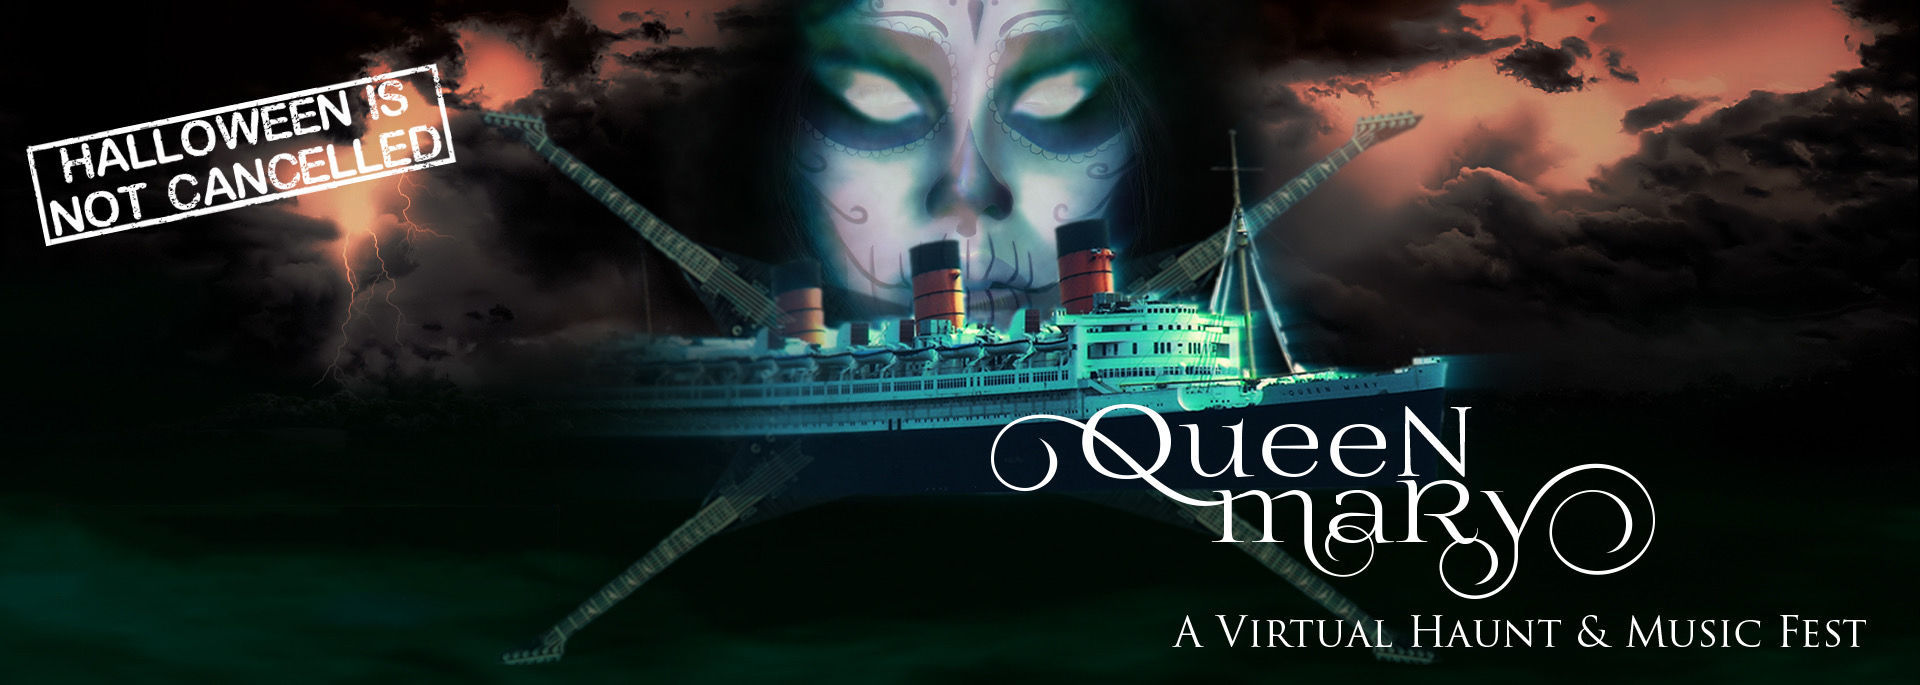 The Queen Mary - Halloween